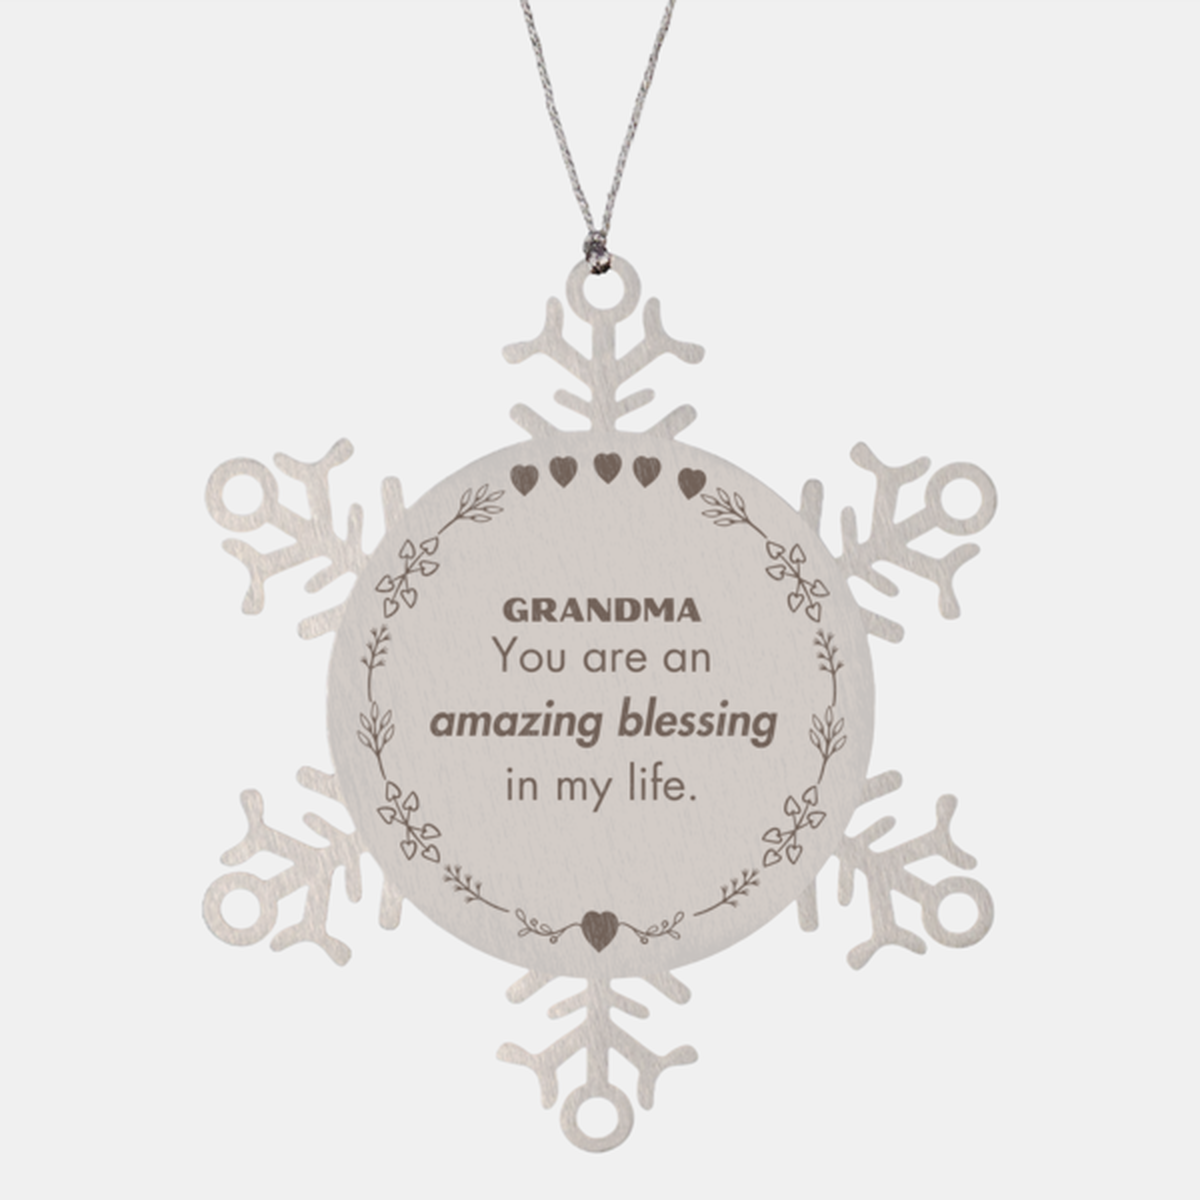 Grandma Snowflake Ornament, You are an amazing blessing in my life, Thank You Gifts For Grandma, Inspirational Birthday Christmas Unique Gifts For Grandma